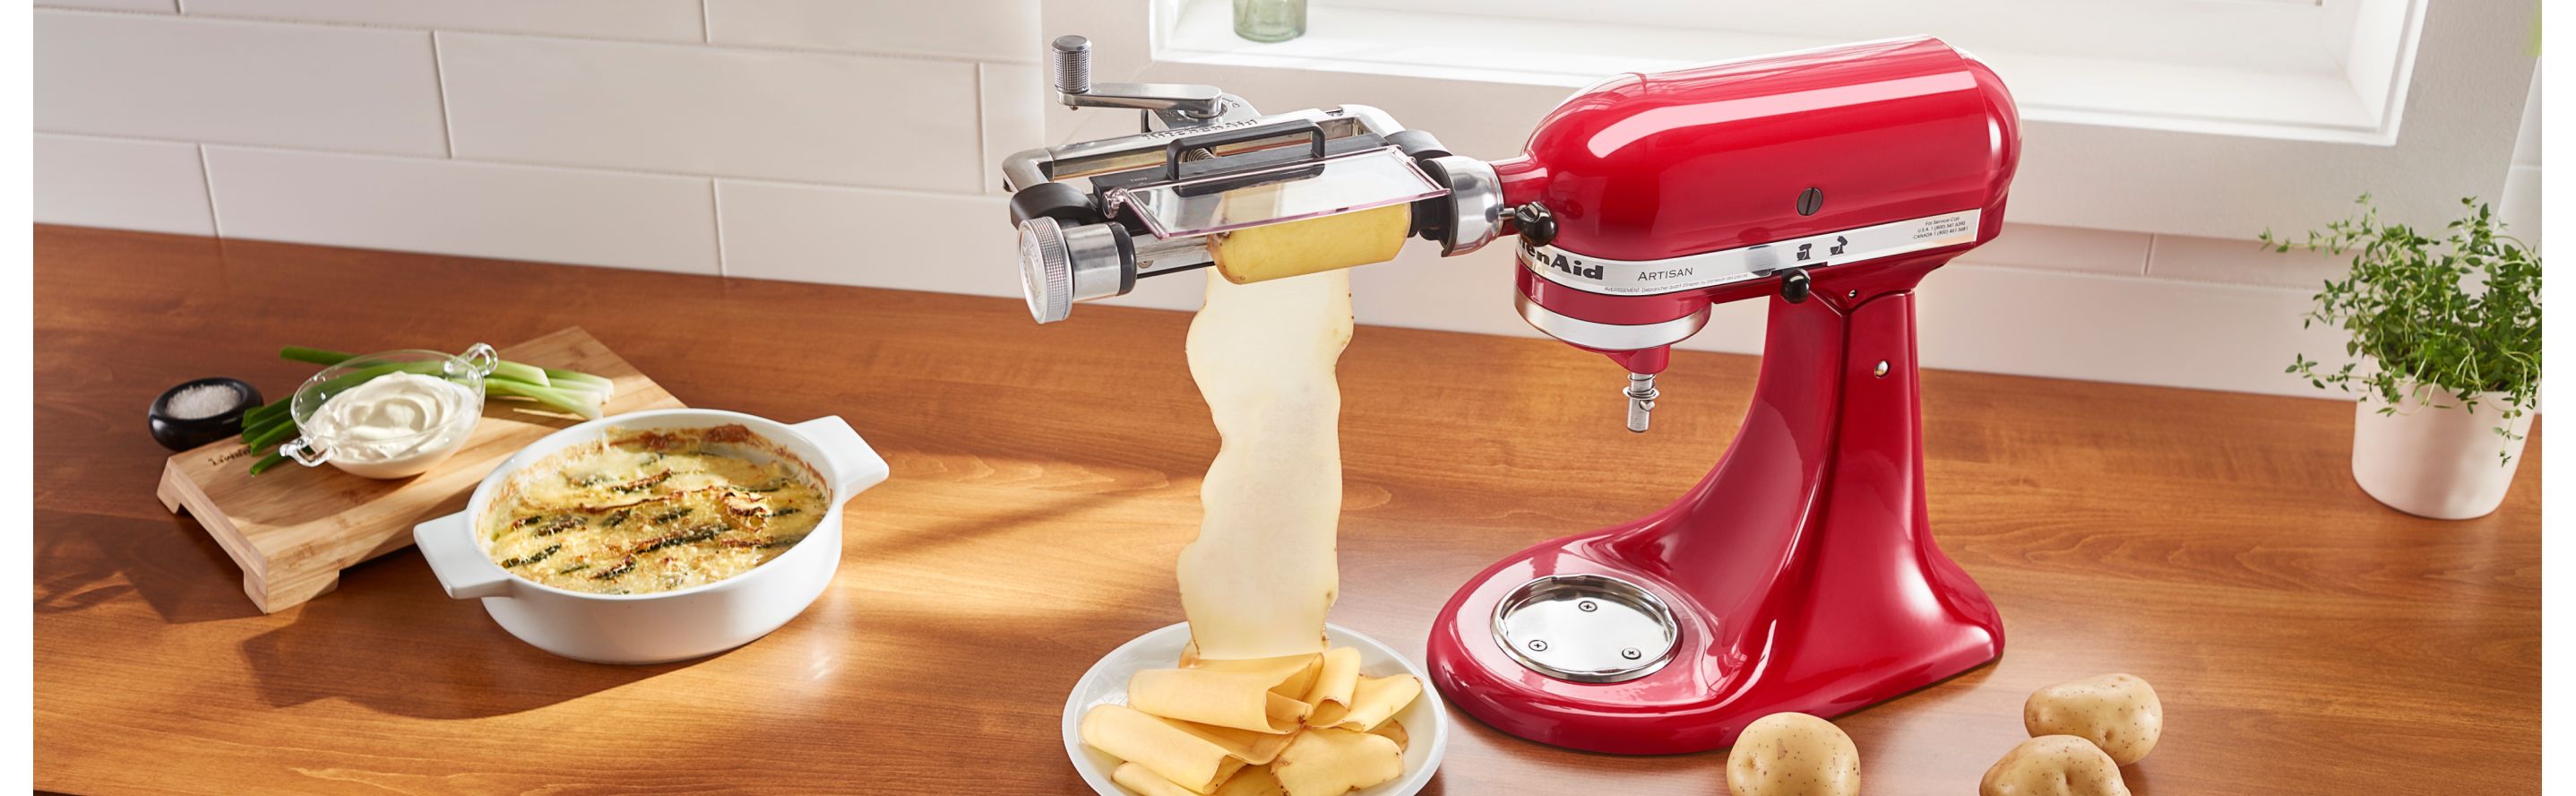 Vegetable Sheet Cutter Recipes And Uses KitchenAid